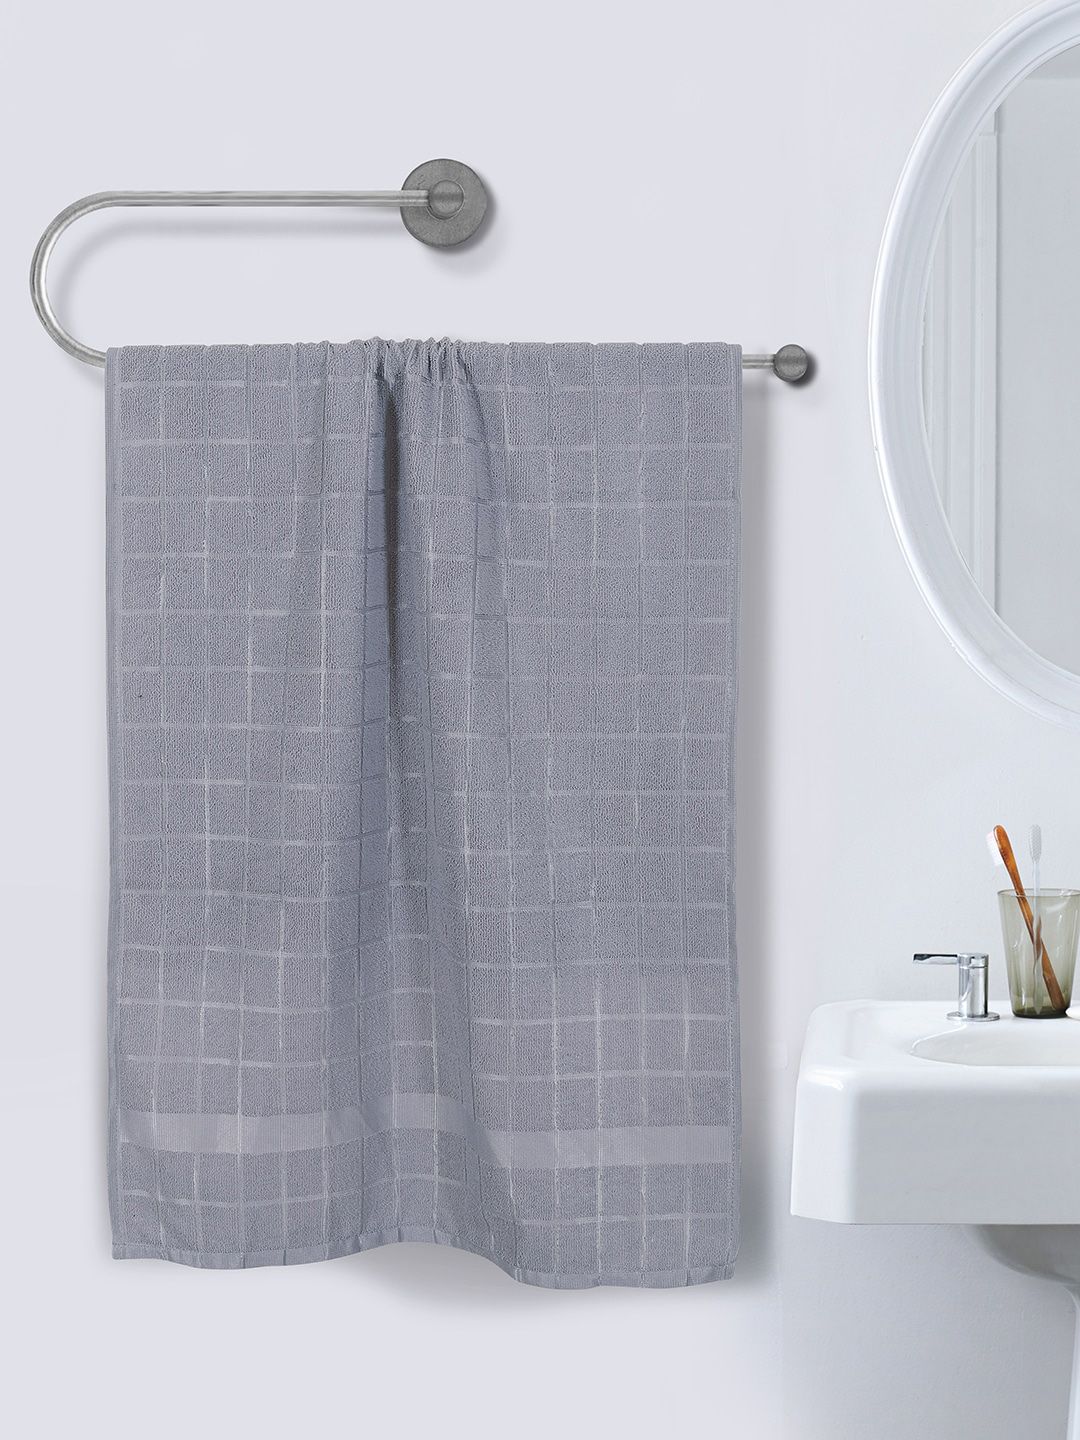 ROMEE Silver-Toned Printed 500 GSM Cotton Bath Towel Price in India